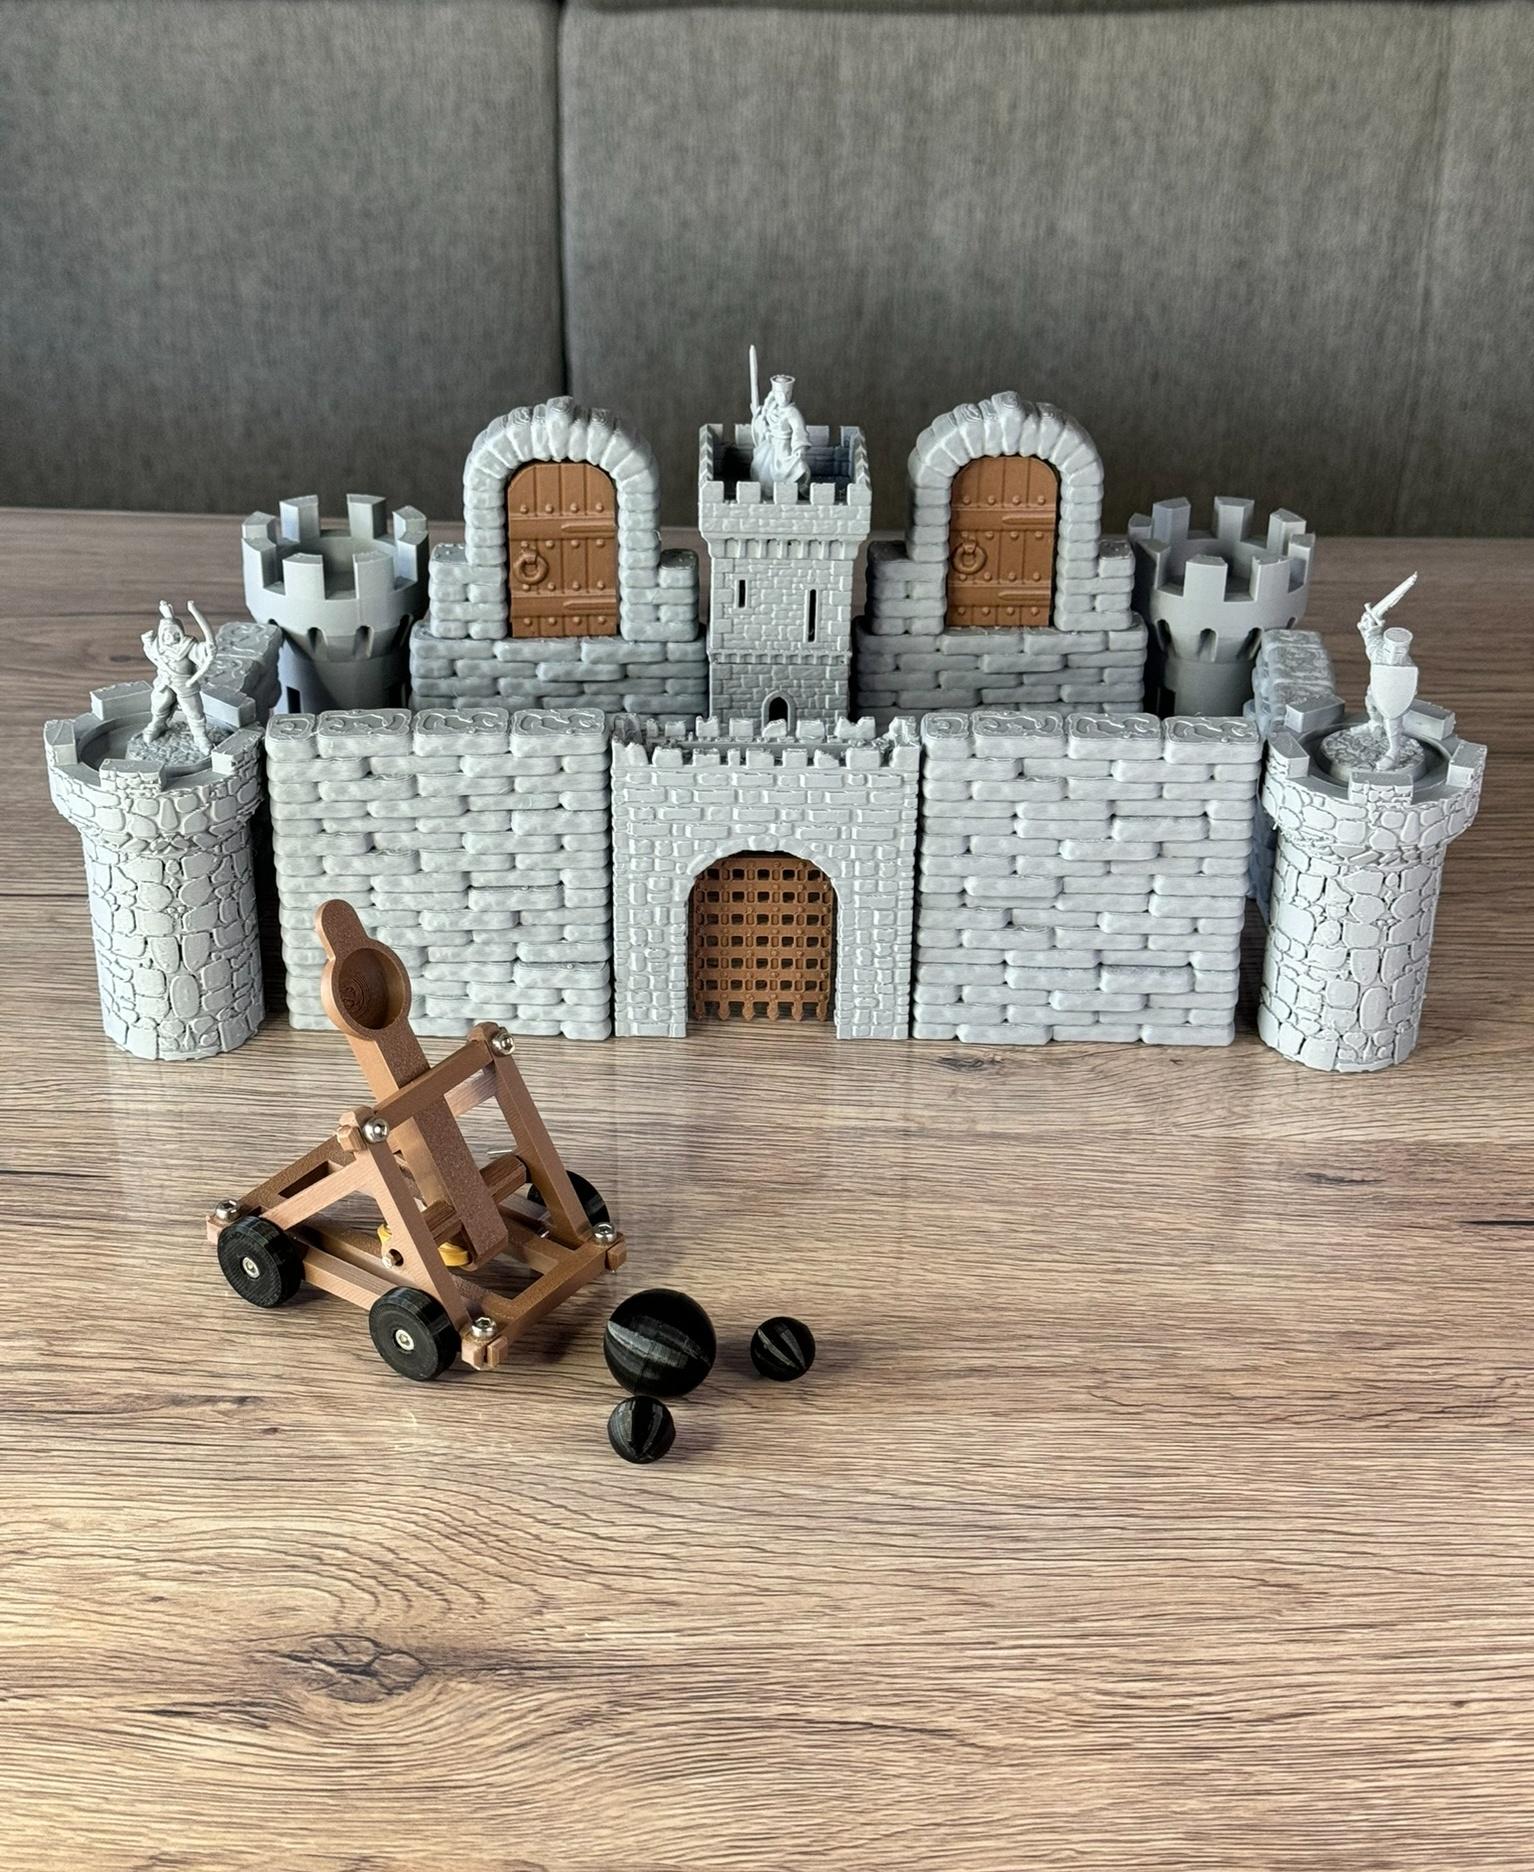 Catapult Crush ! - Catapult crush game 3D printed with real catapult and TPU cannonballs ! - 3d model